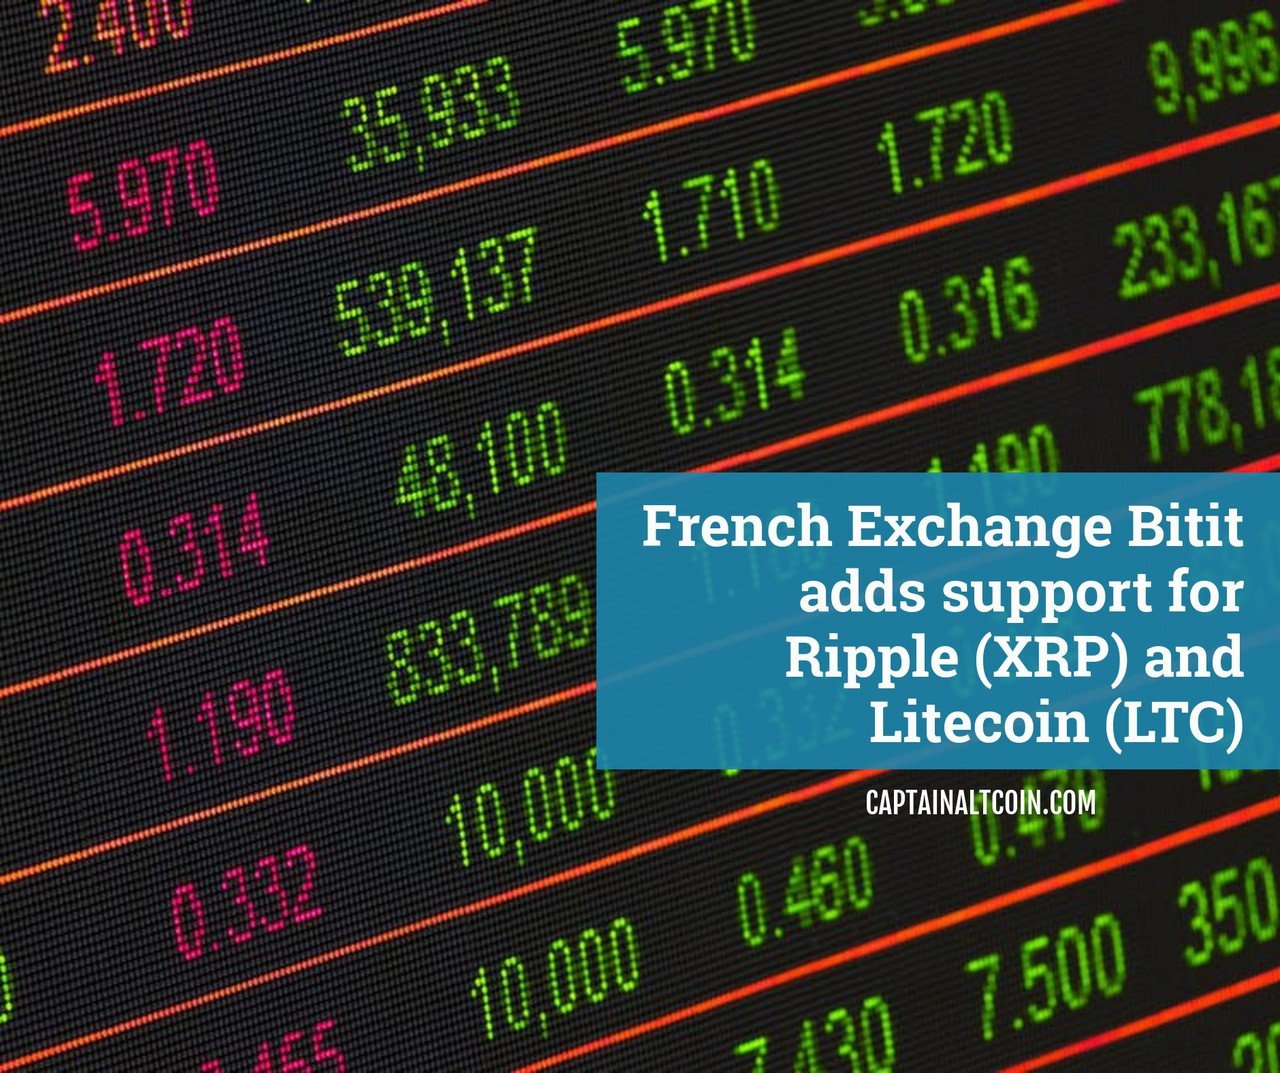 French Exchange Bitit adds support for Ripple (XRP) and Litecoin (LTC)